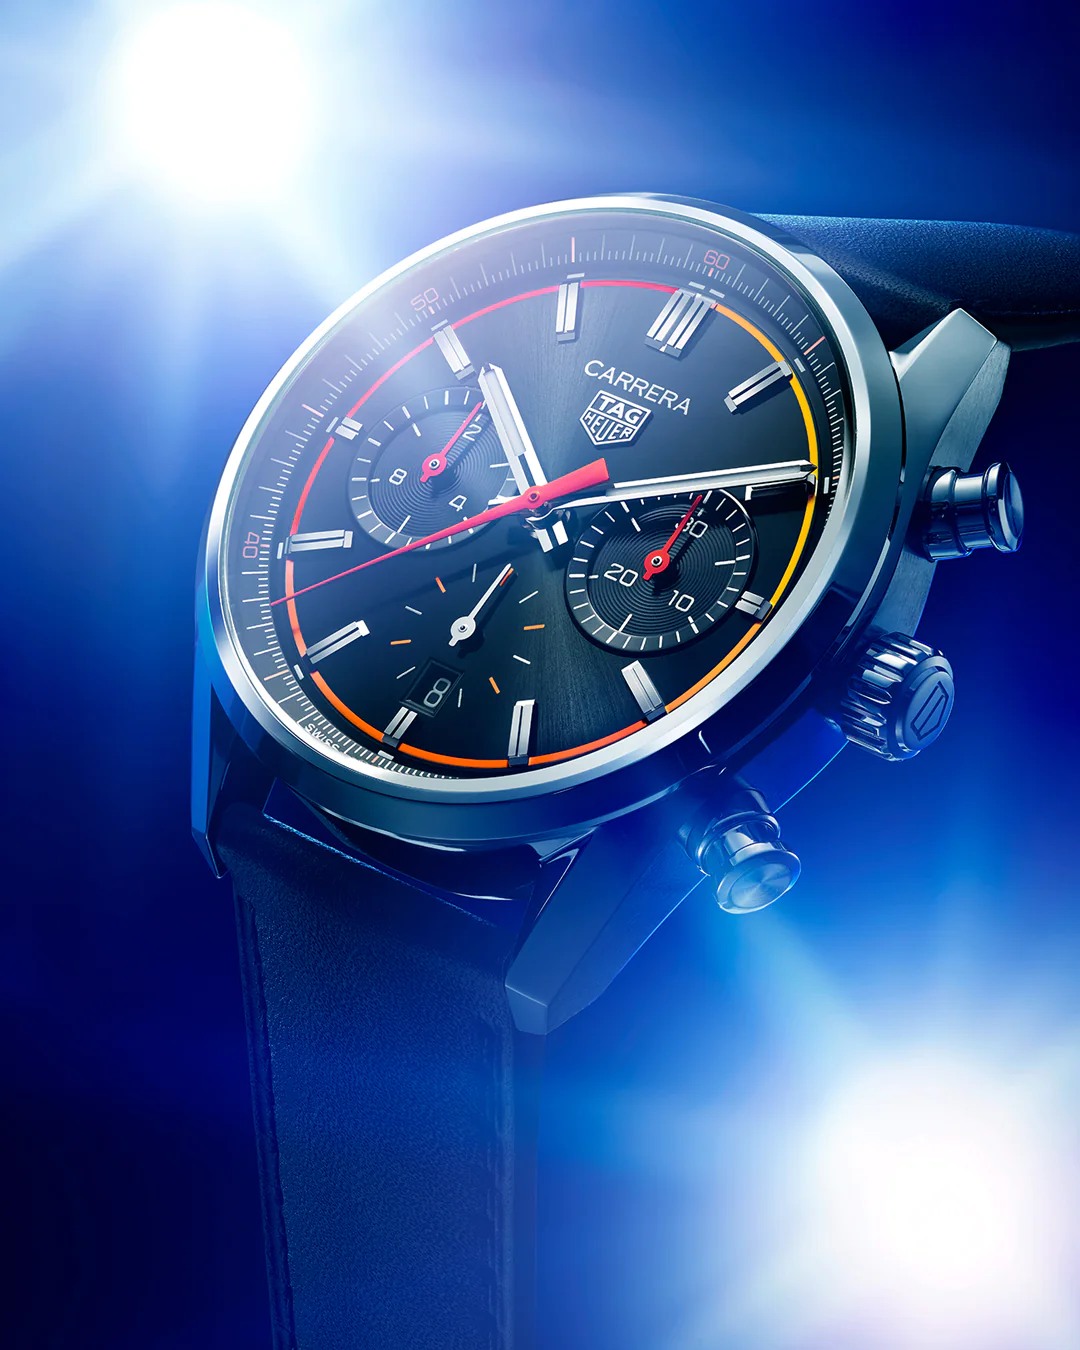 The latest digital watch from Tag Heuer - autoX